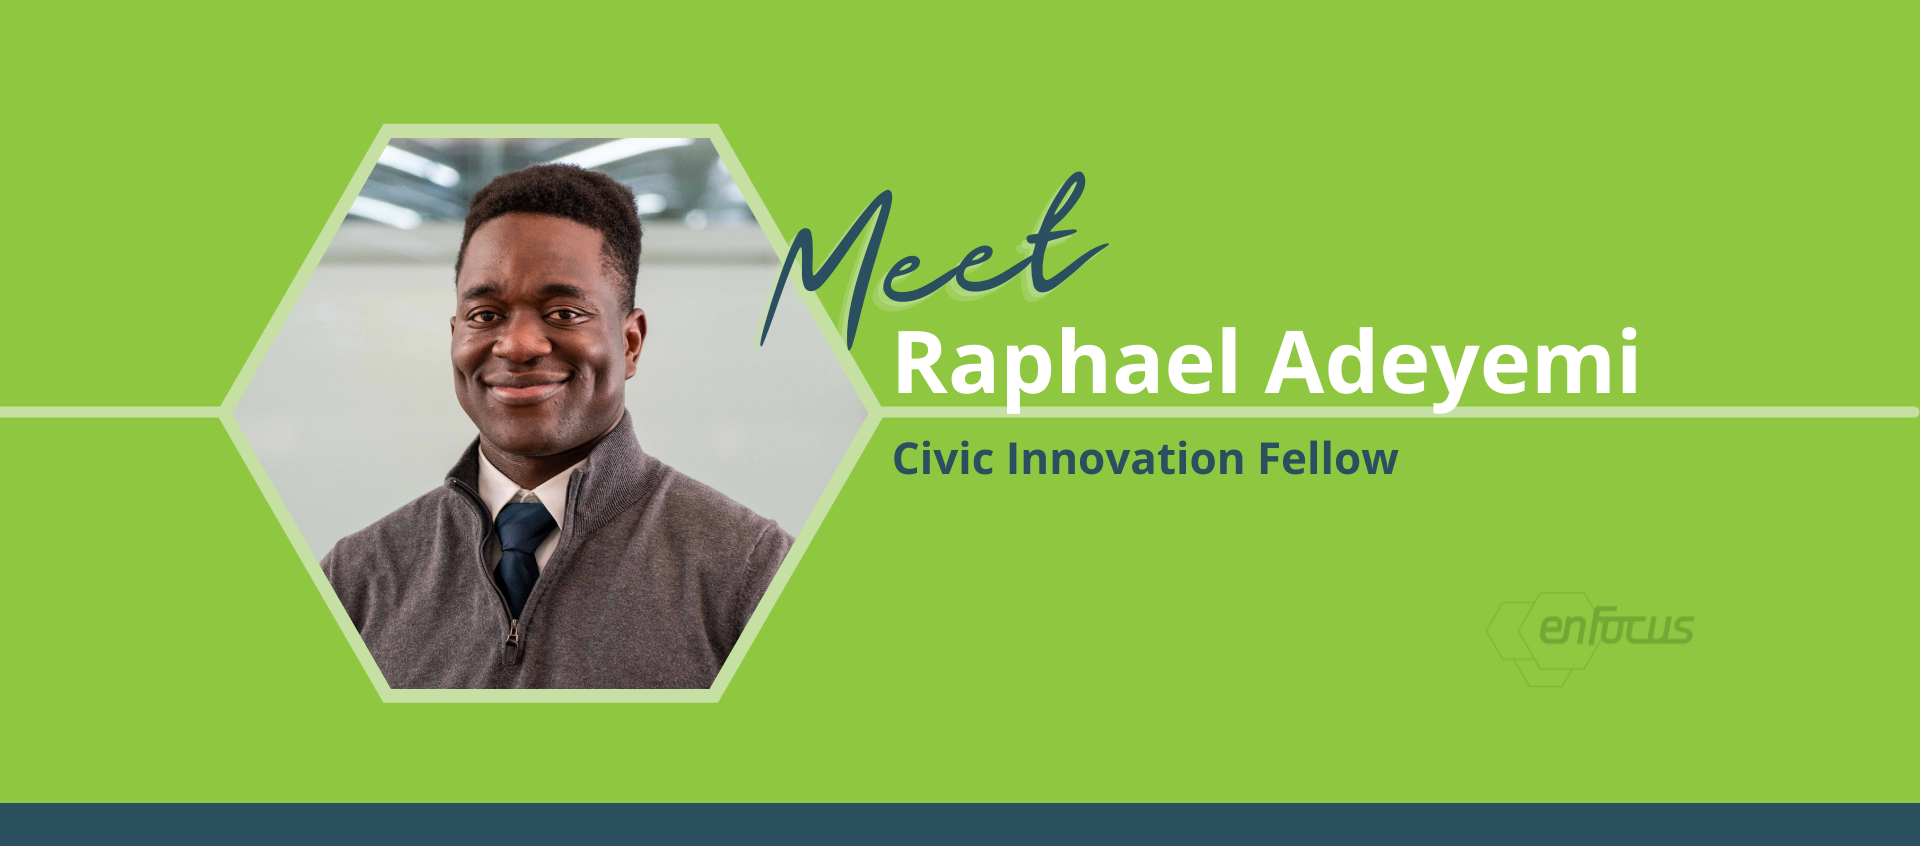 Raphael Sees Cross-Cultural Collaboration as a Means Toward Community Innovation